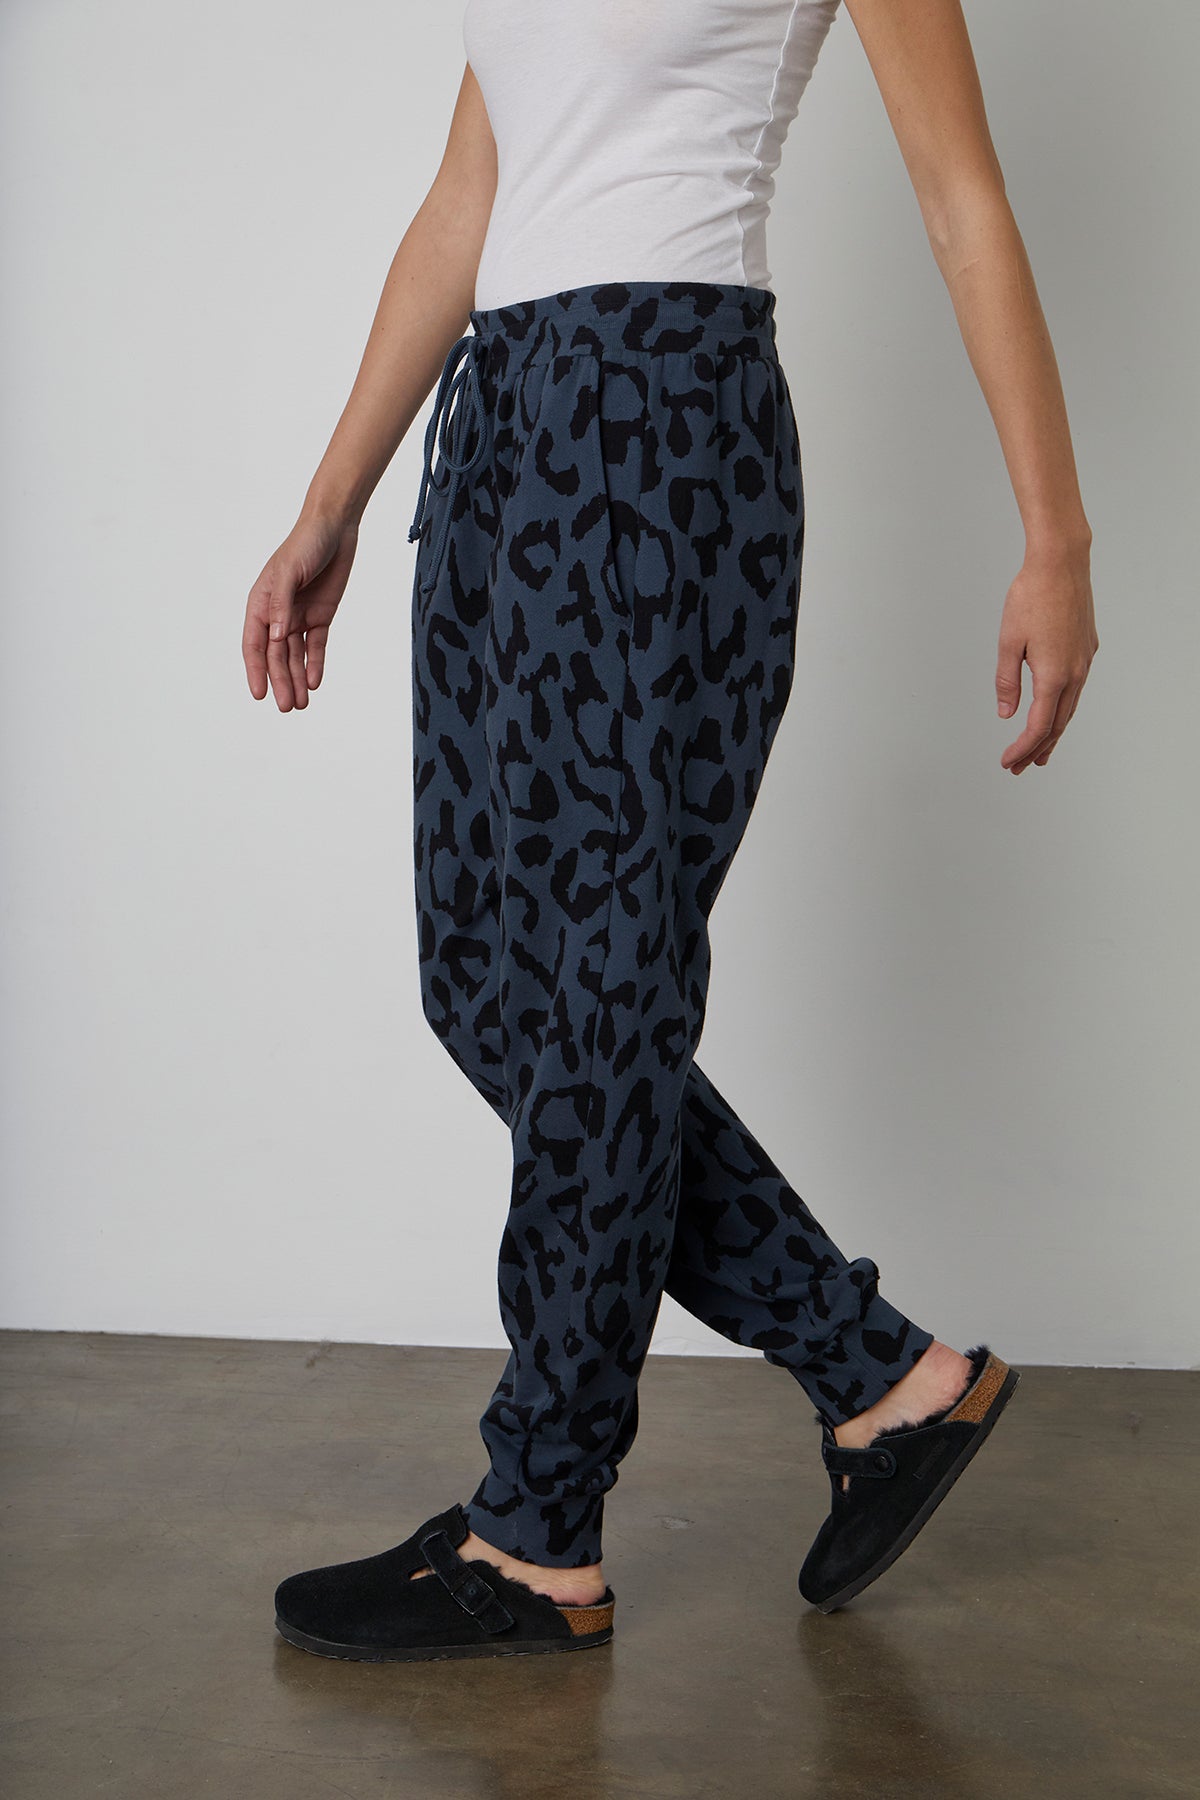 A woman wearing Velvet by Graham & Spencer's GWEN PRINTED JOGGER jogger pants with a relaxed fit.-23119957524673